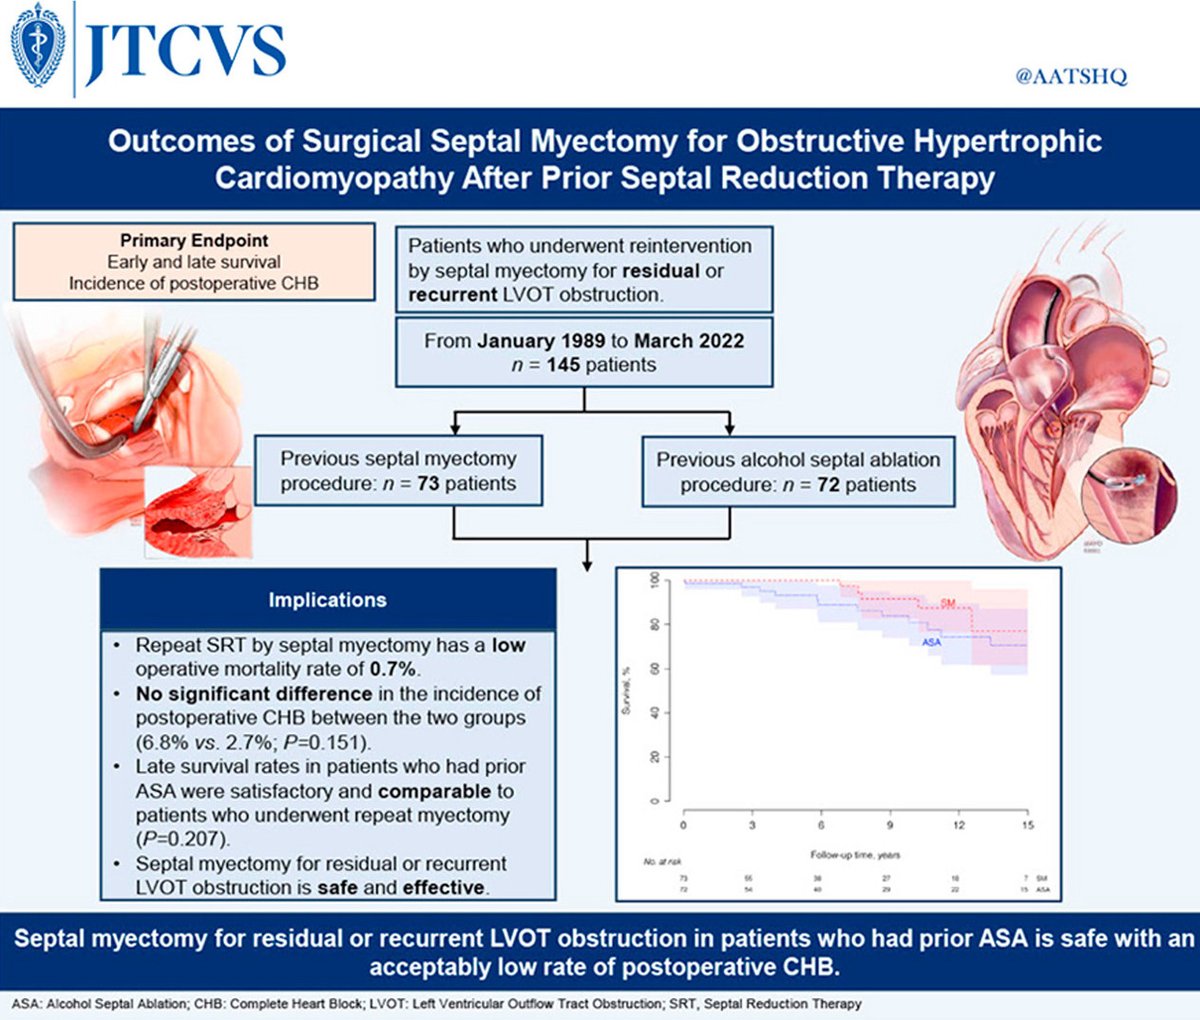 Check out this informative #JTCVS article, 'Outcomes of Surgical Septal Myectomy for Obstructive HCM After Prior Septal Reduction Therapy' discussed by experts @HSchaffMD, Y. Quamar MBBS, @SteveOmmen & several other @MayoClinicCV experts. bit.ly/3QTKeqC